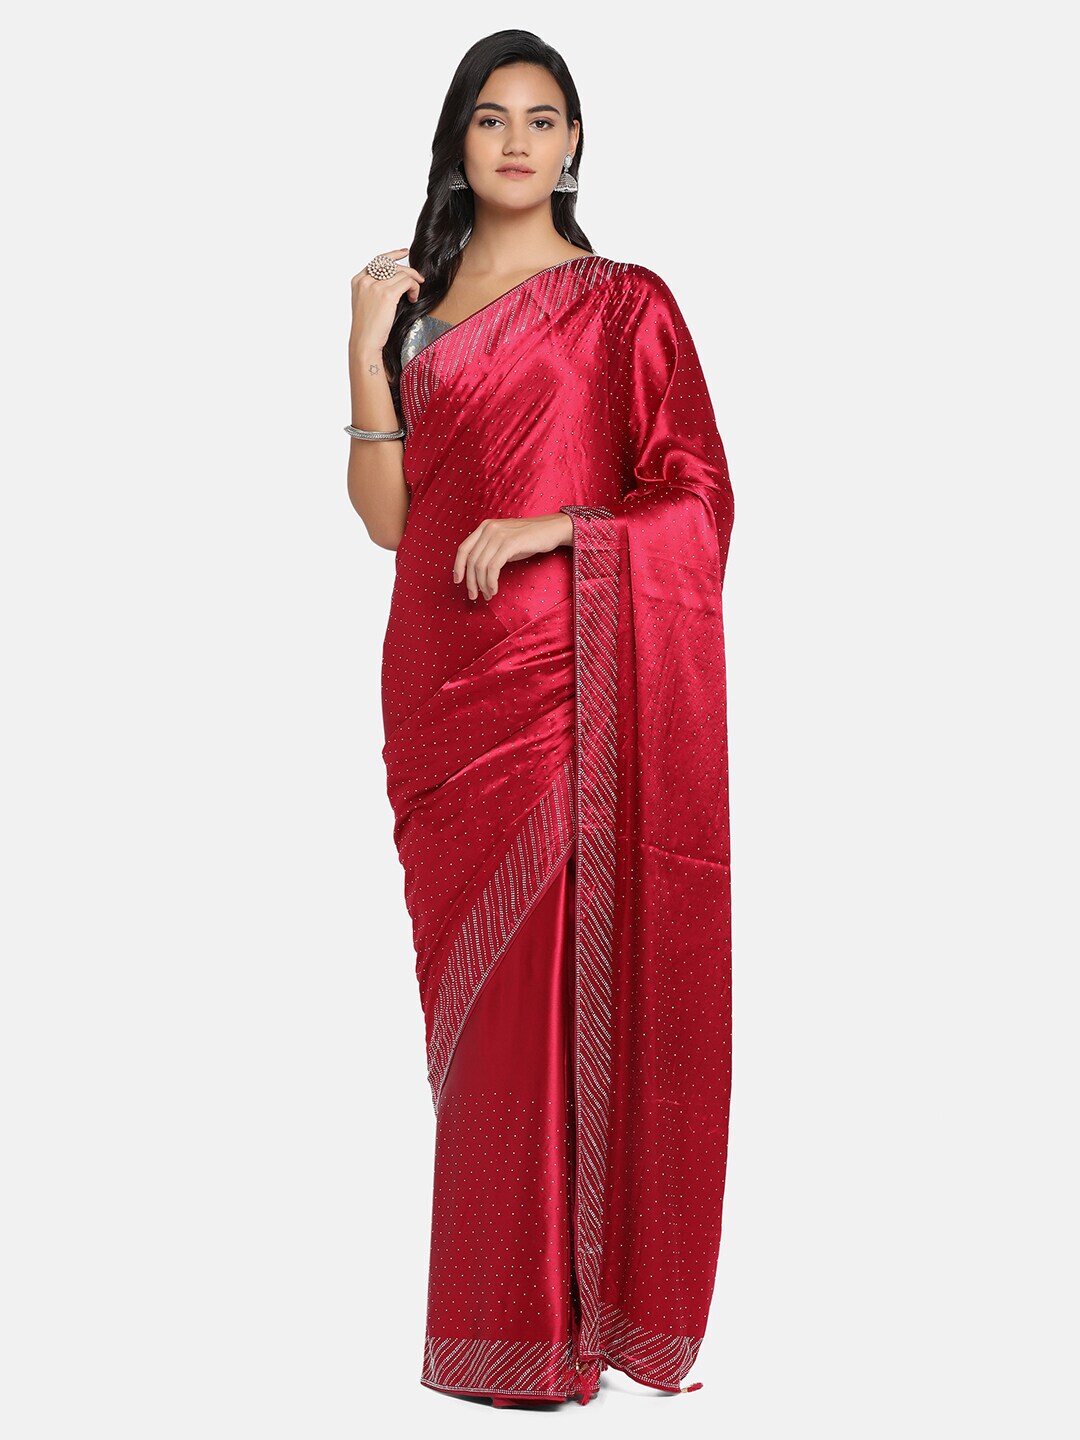 BOMBAY SELECTIONS Maroon & Silver-Toned Embellished Beads and Stones Satin Saree Price in India